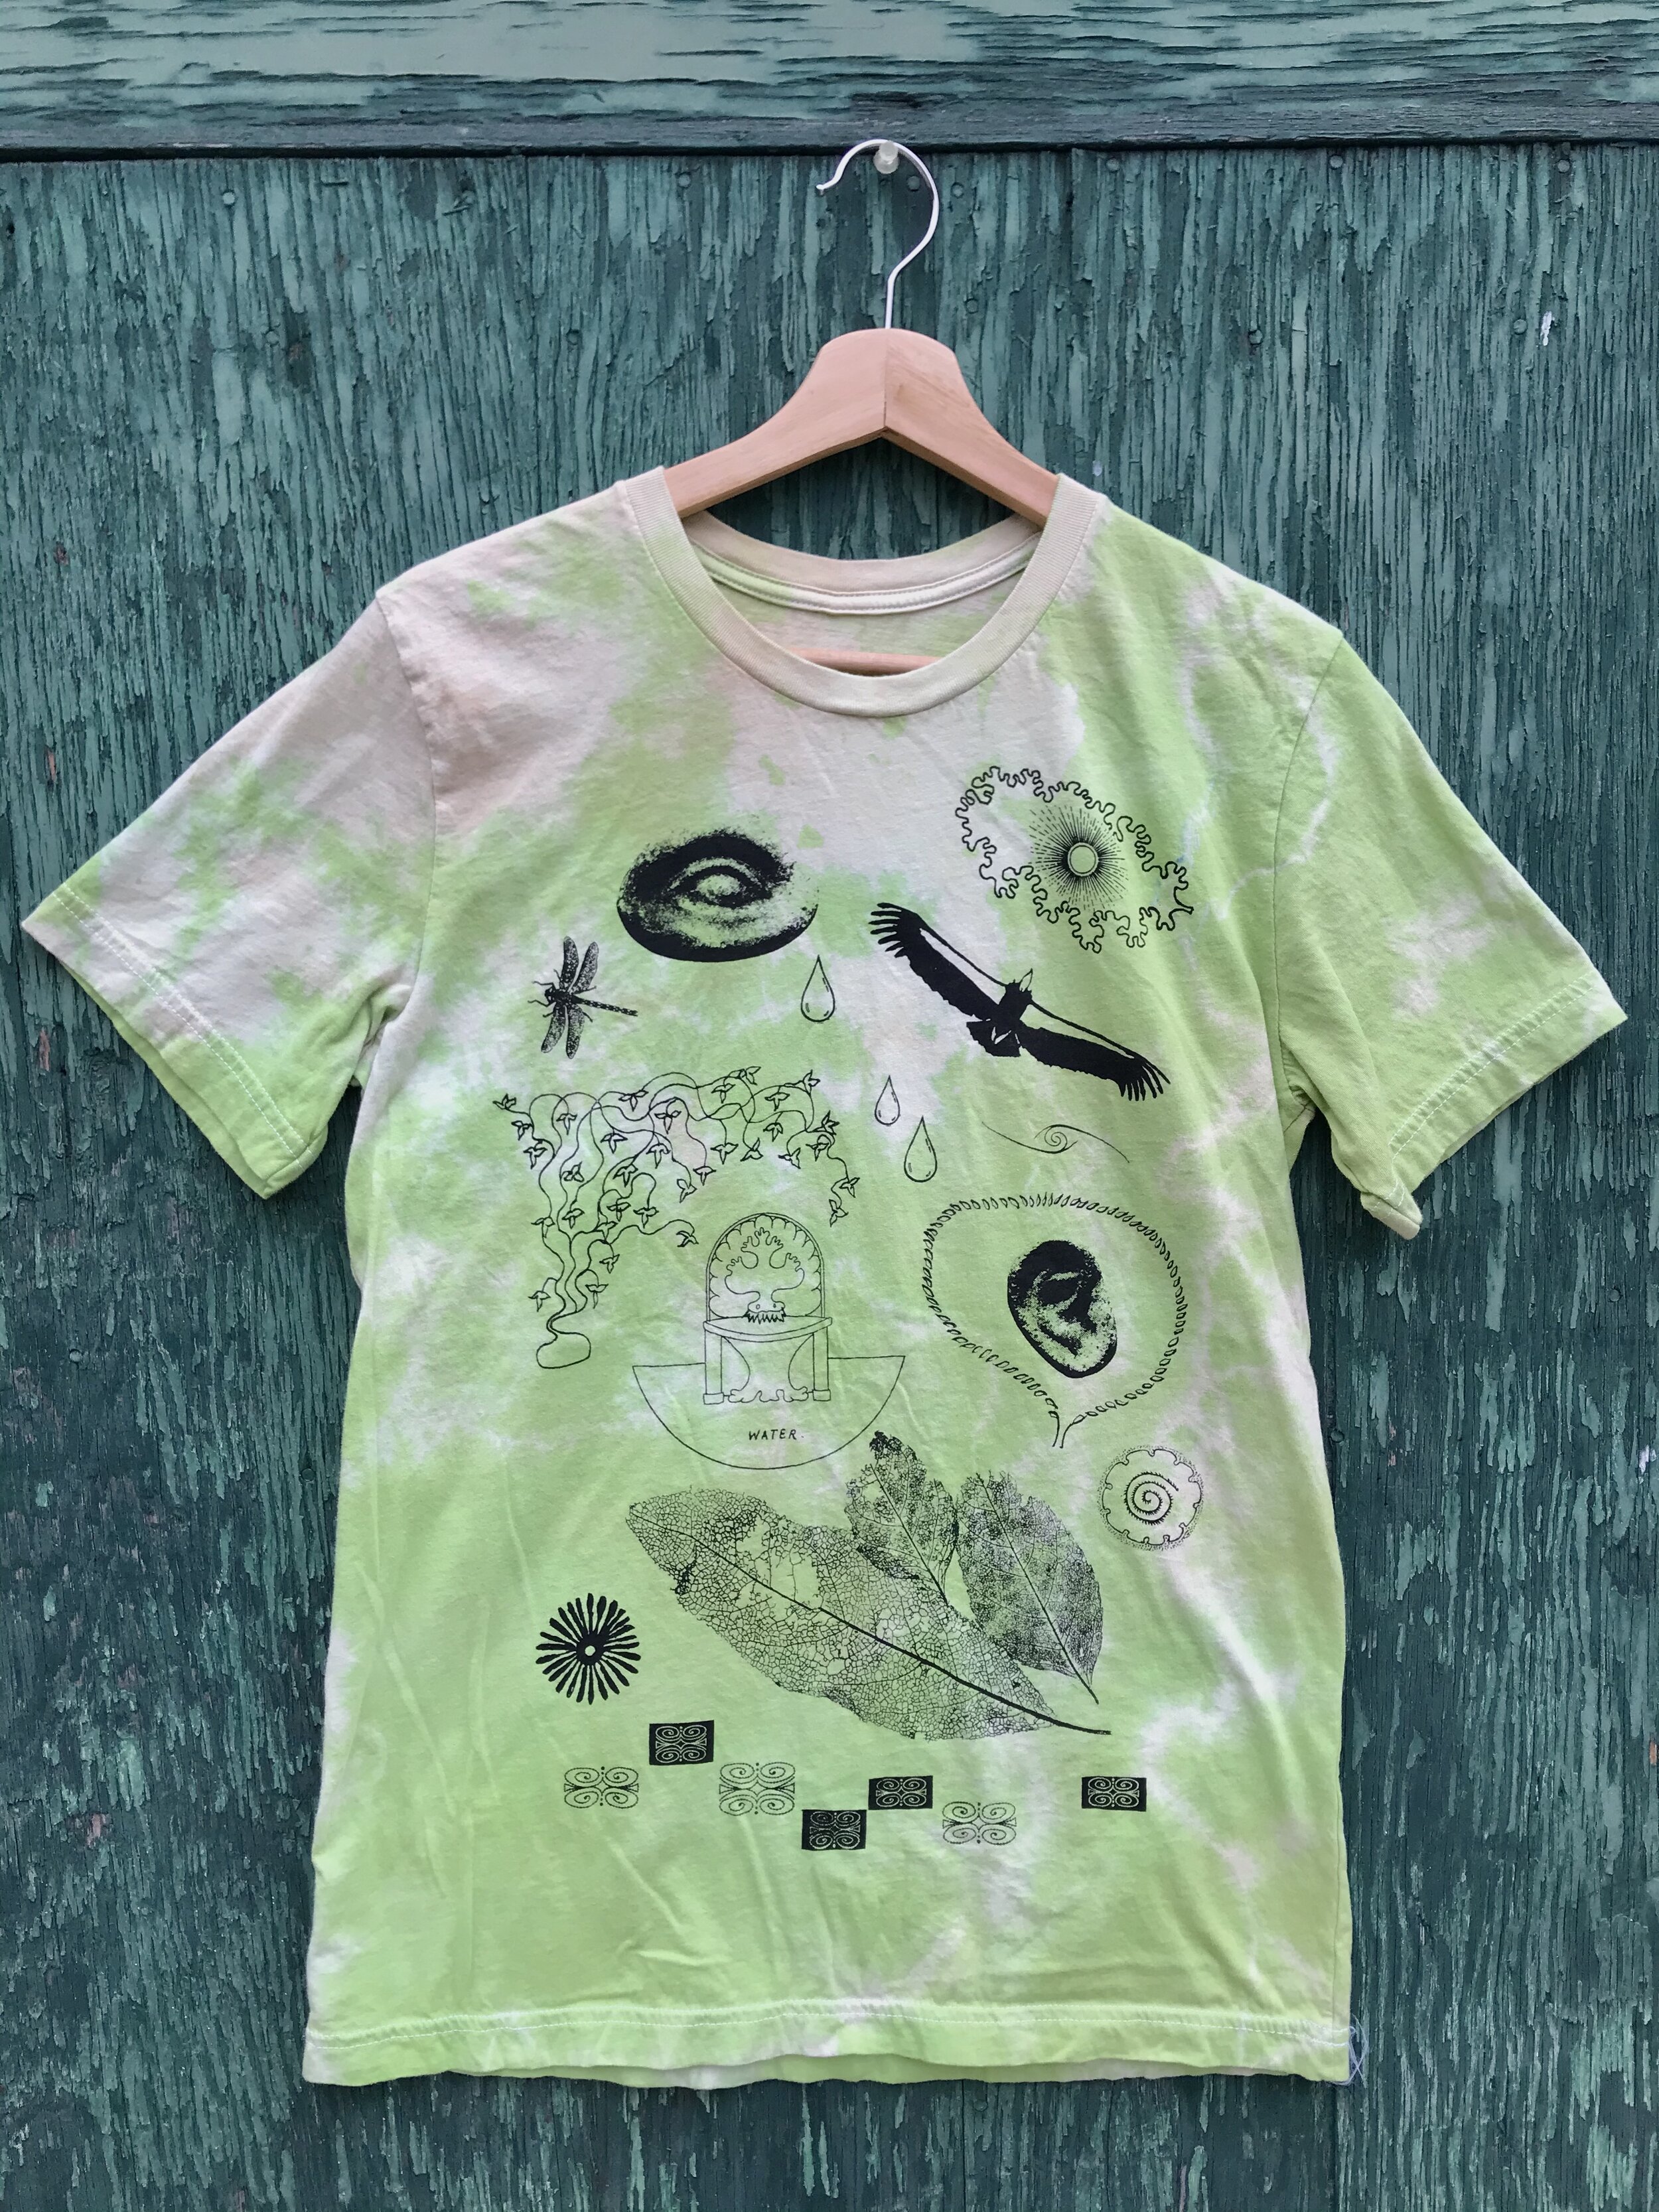  The Forest Remembers t-shirt  Tie dyed and screenprinted   open edition, 2020 